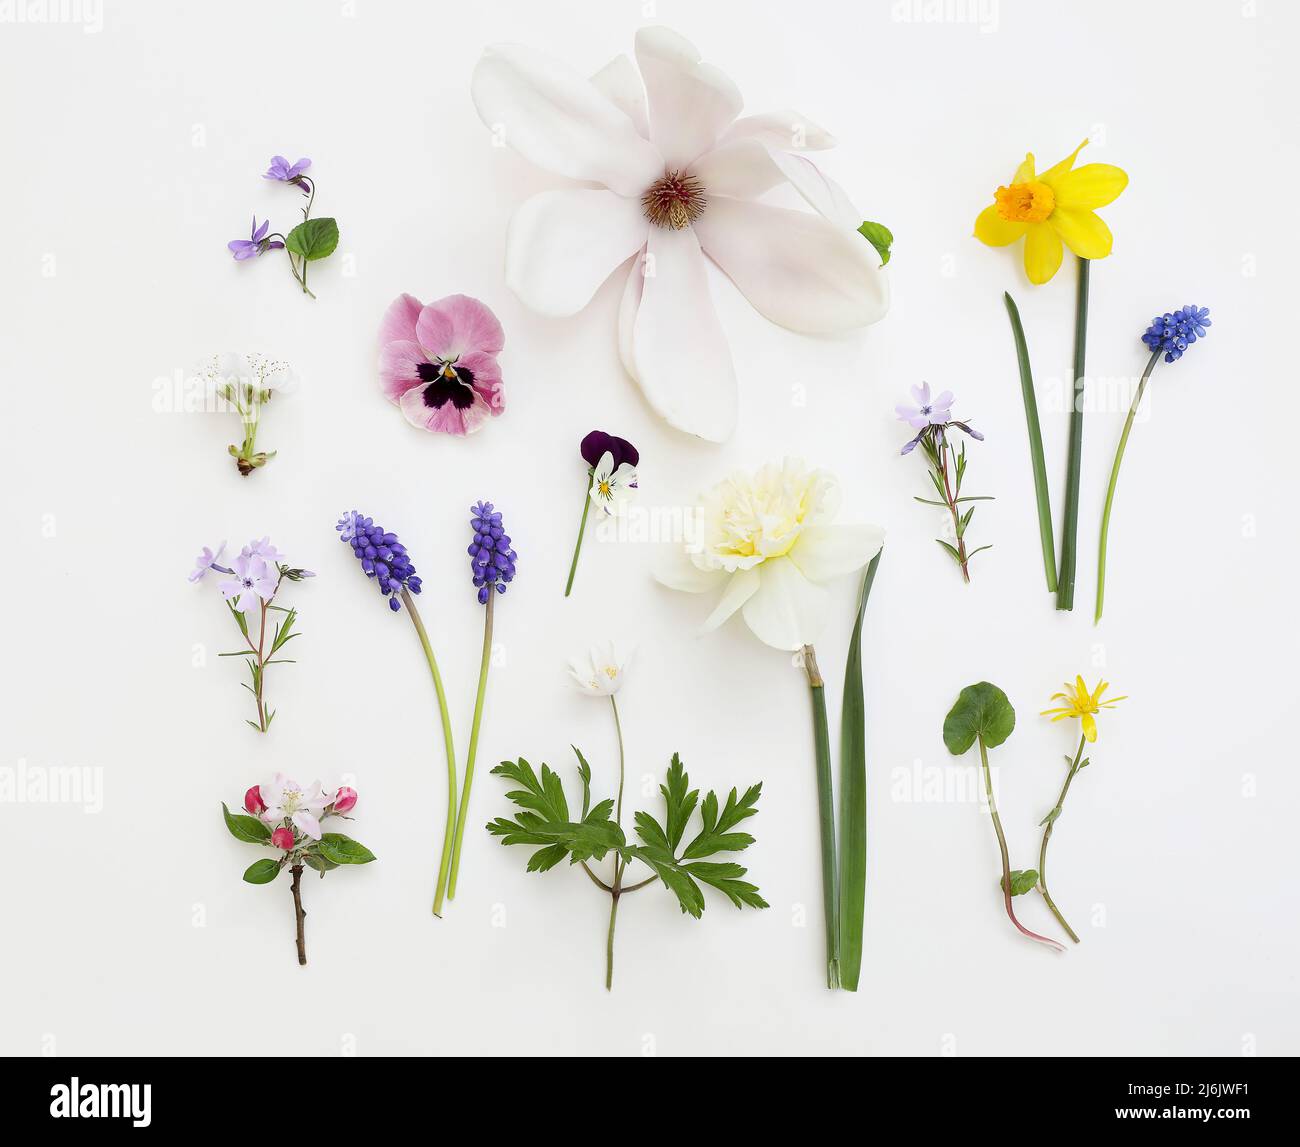 Spring botanical pattern. Floral composition. Magnolia, cherry and apple tree blossoms. Muscari, daffodil, anemone and pansy flowers. Viola, orsay Stock Photo